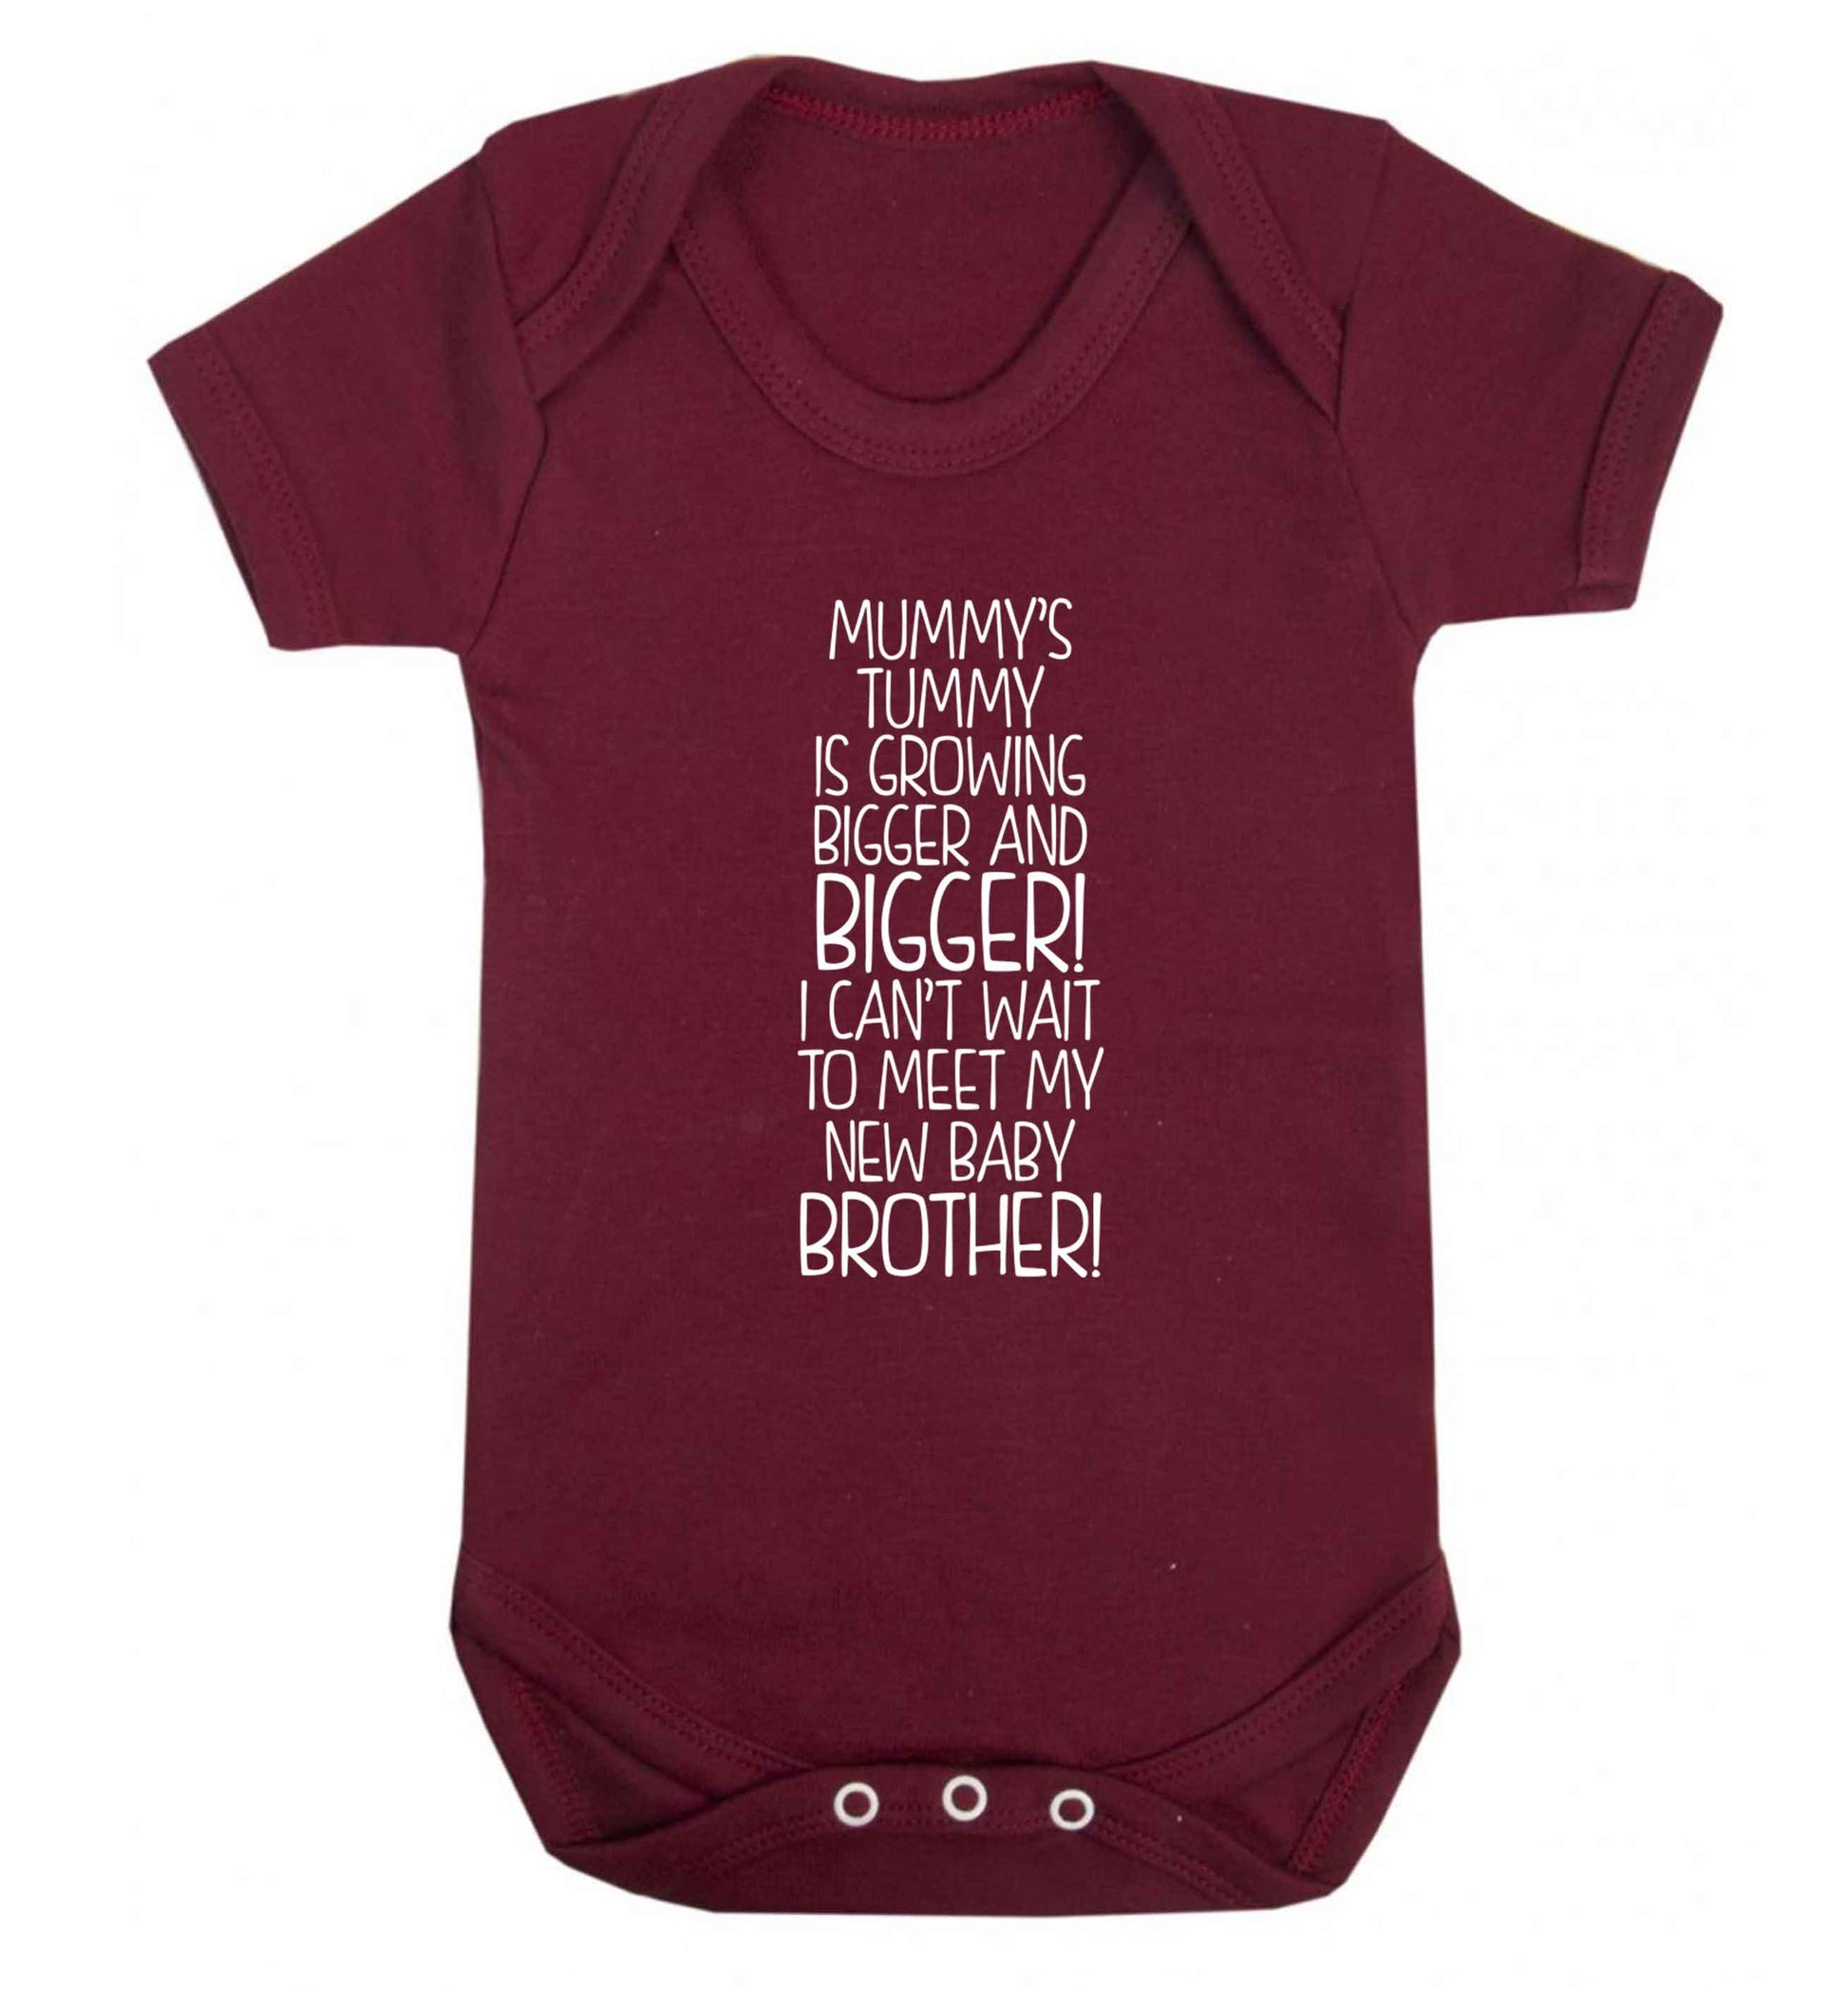 Mummy's tummy is growing bigger and bigger I can't wait to meet my new baby brother! Baby Vest maroon 18-24 months